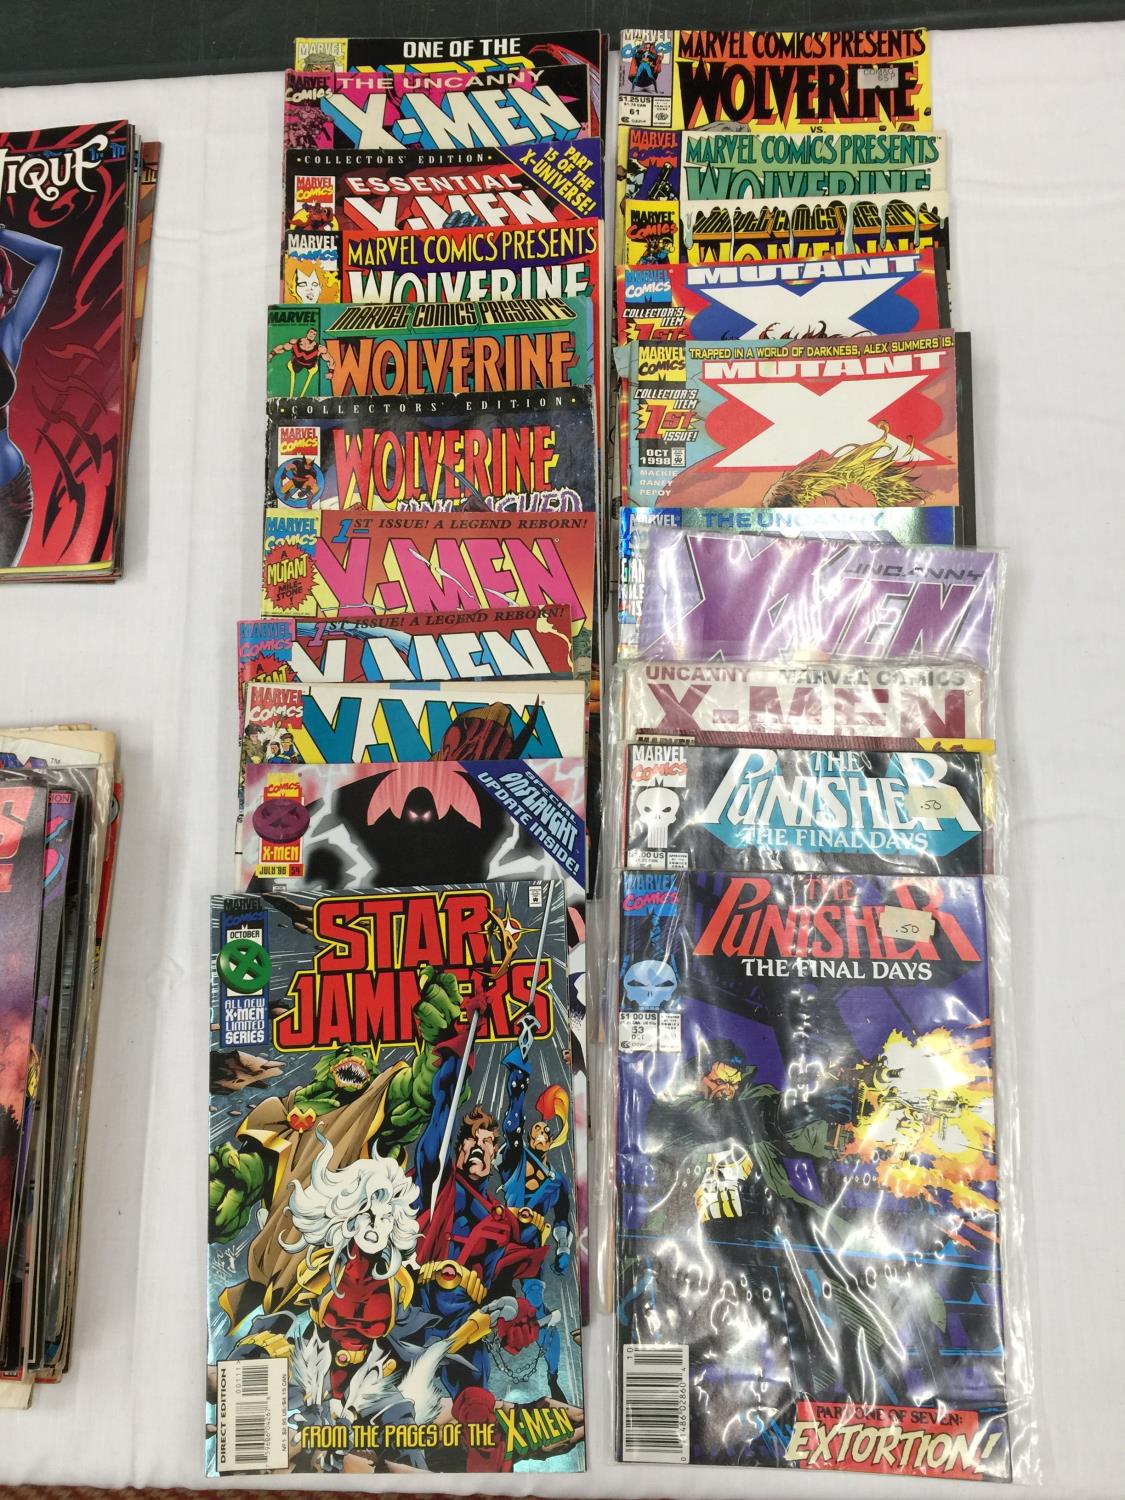 A COLLECTION OF 23 1990'S MARVEL COMICS TO INCLUDE X-MEN, WOLVERINE, THE PUNISHER, MUTANT X, STAR